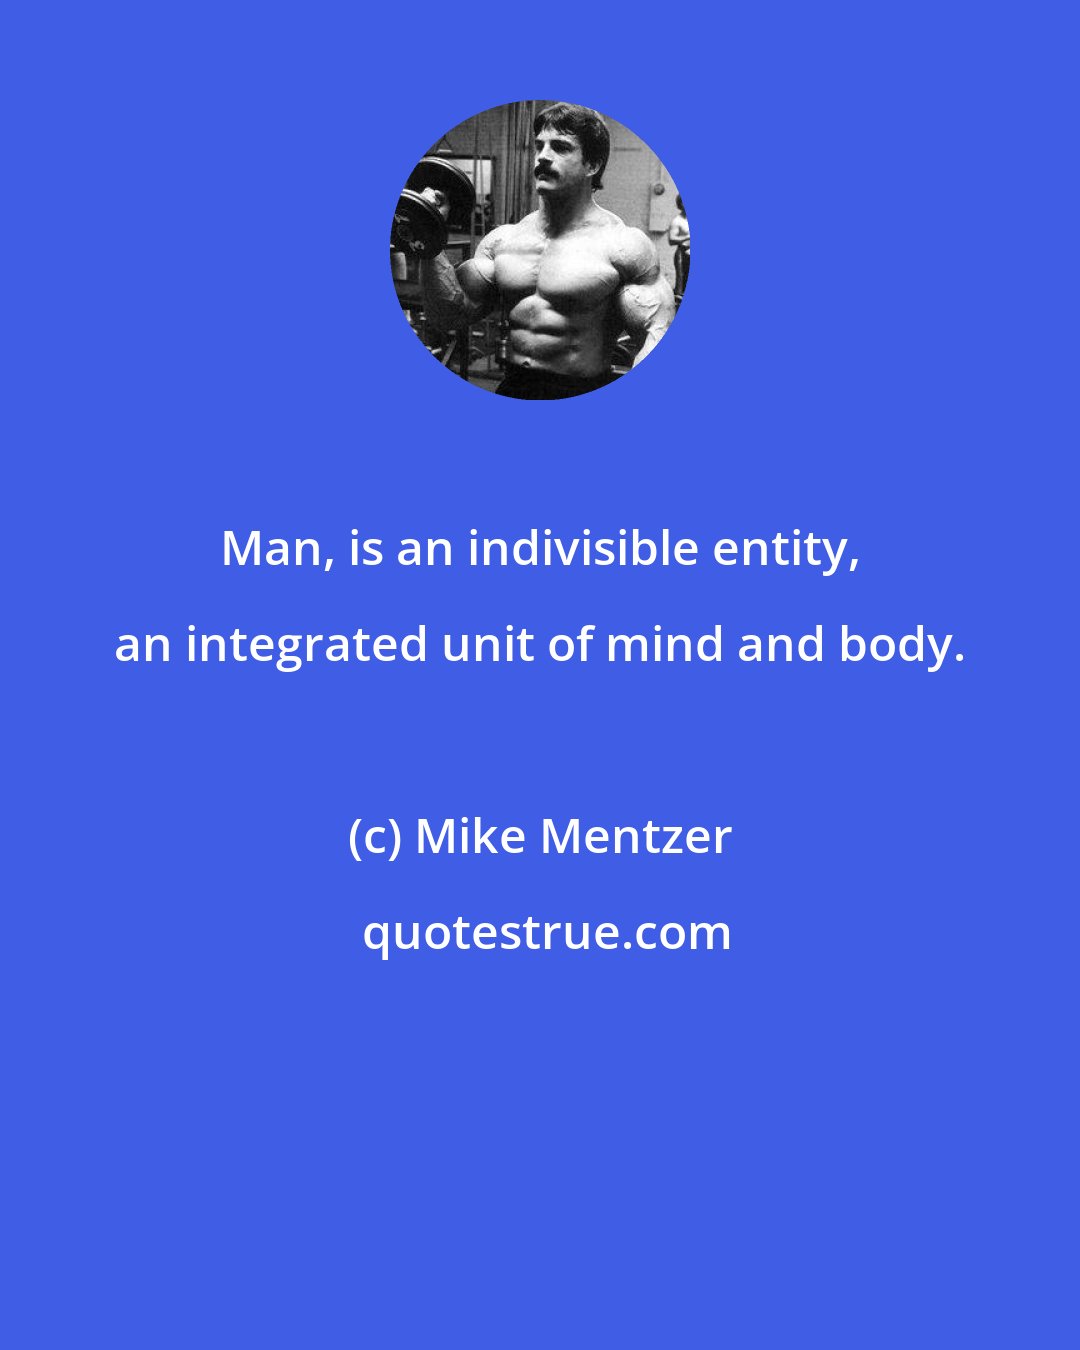 Mike Mentzer: Man, is an indivisible entity, an integrated unit of mind and body.